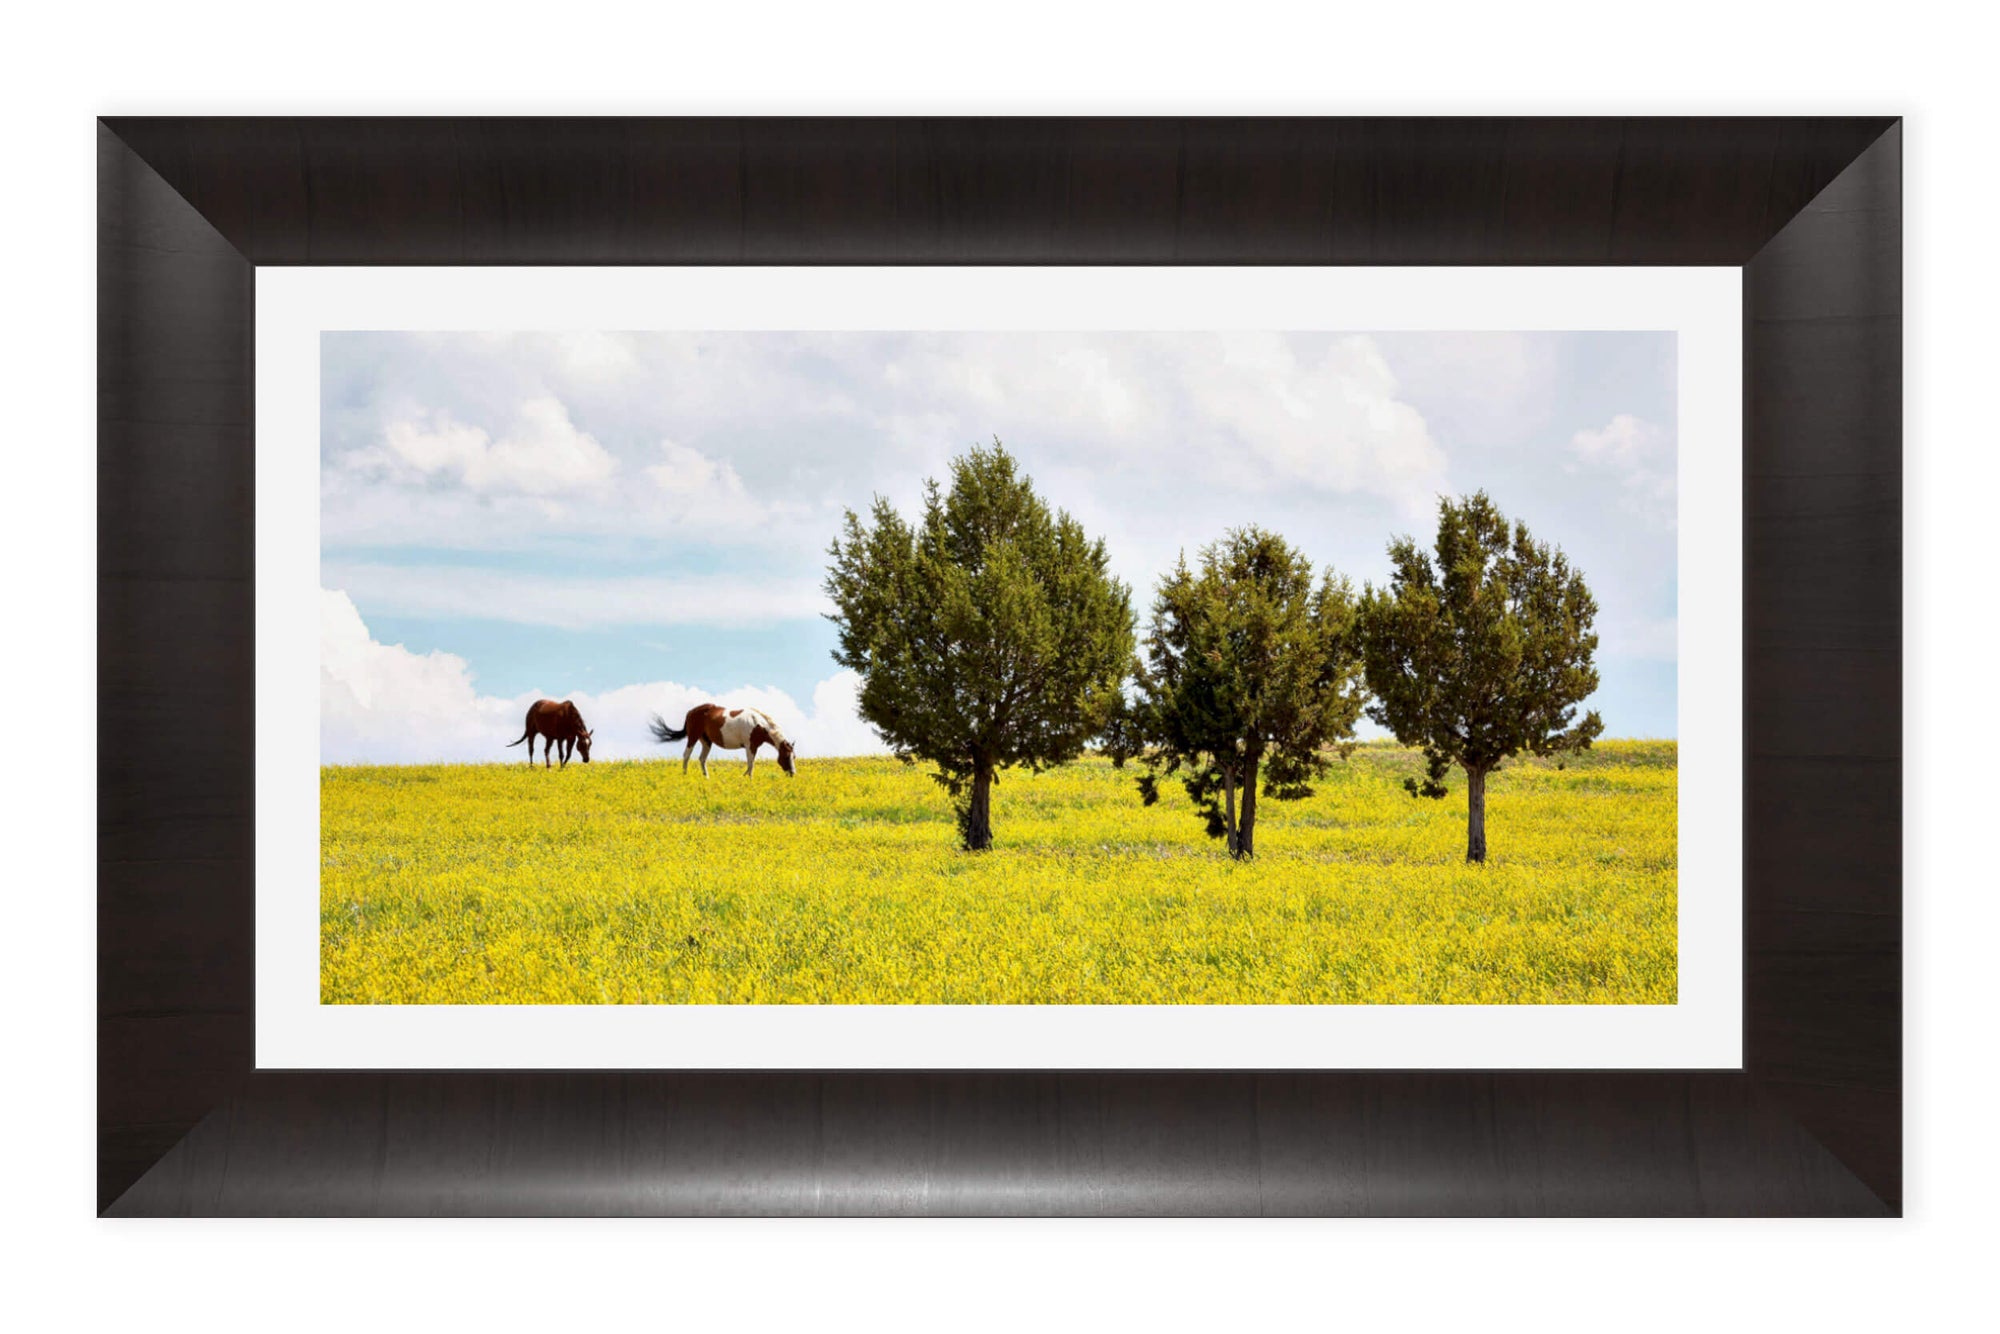 A framed Colorado horse picture taken in Rifle.